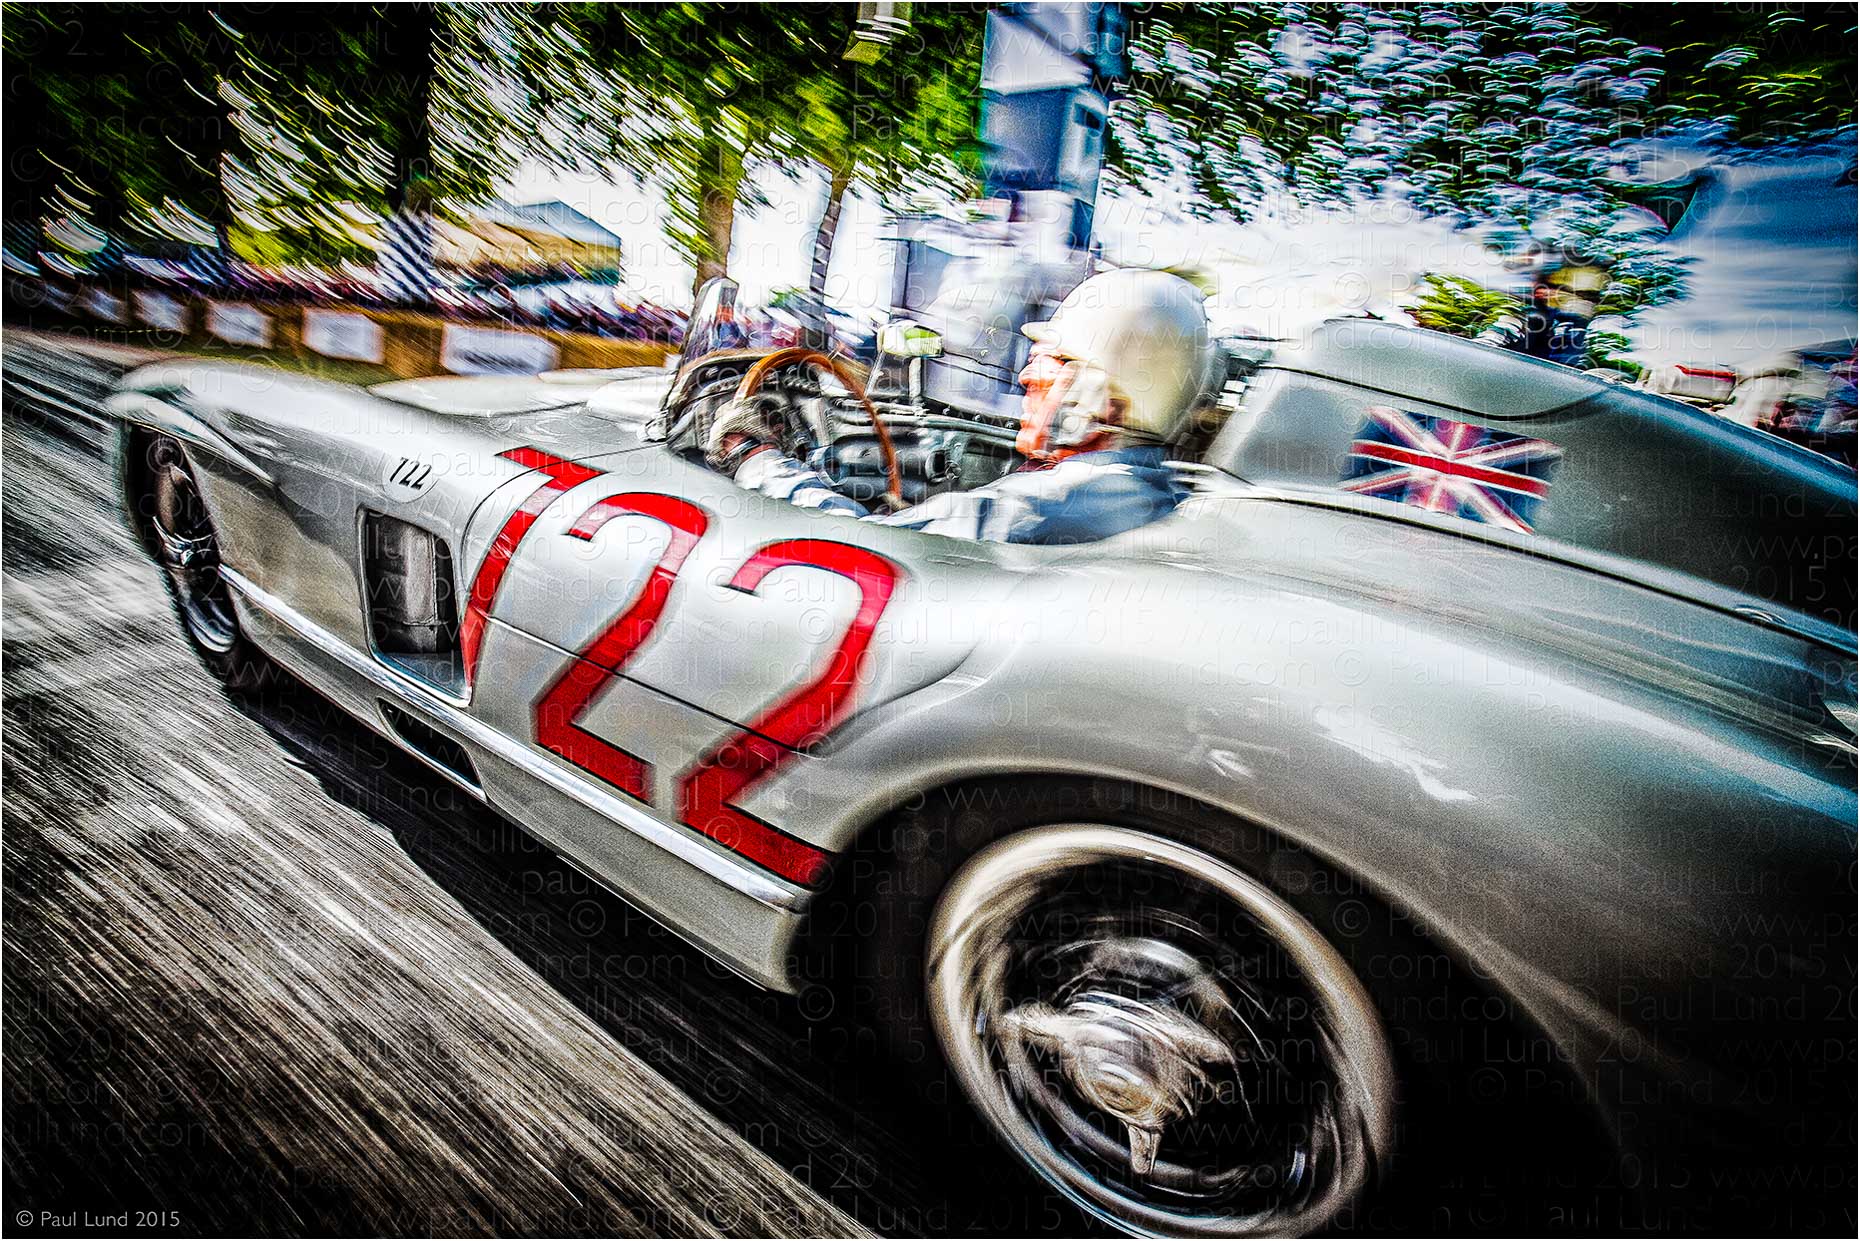 Sir Stirling Moss in his 1955 Mille Miglia winning Silver Arrows Mercedes Benz 300 SLR at The Goodwood Festival of Speed 2015. Photograher: Paul Lund